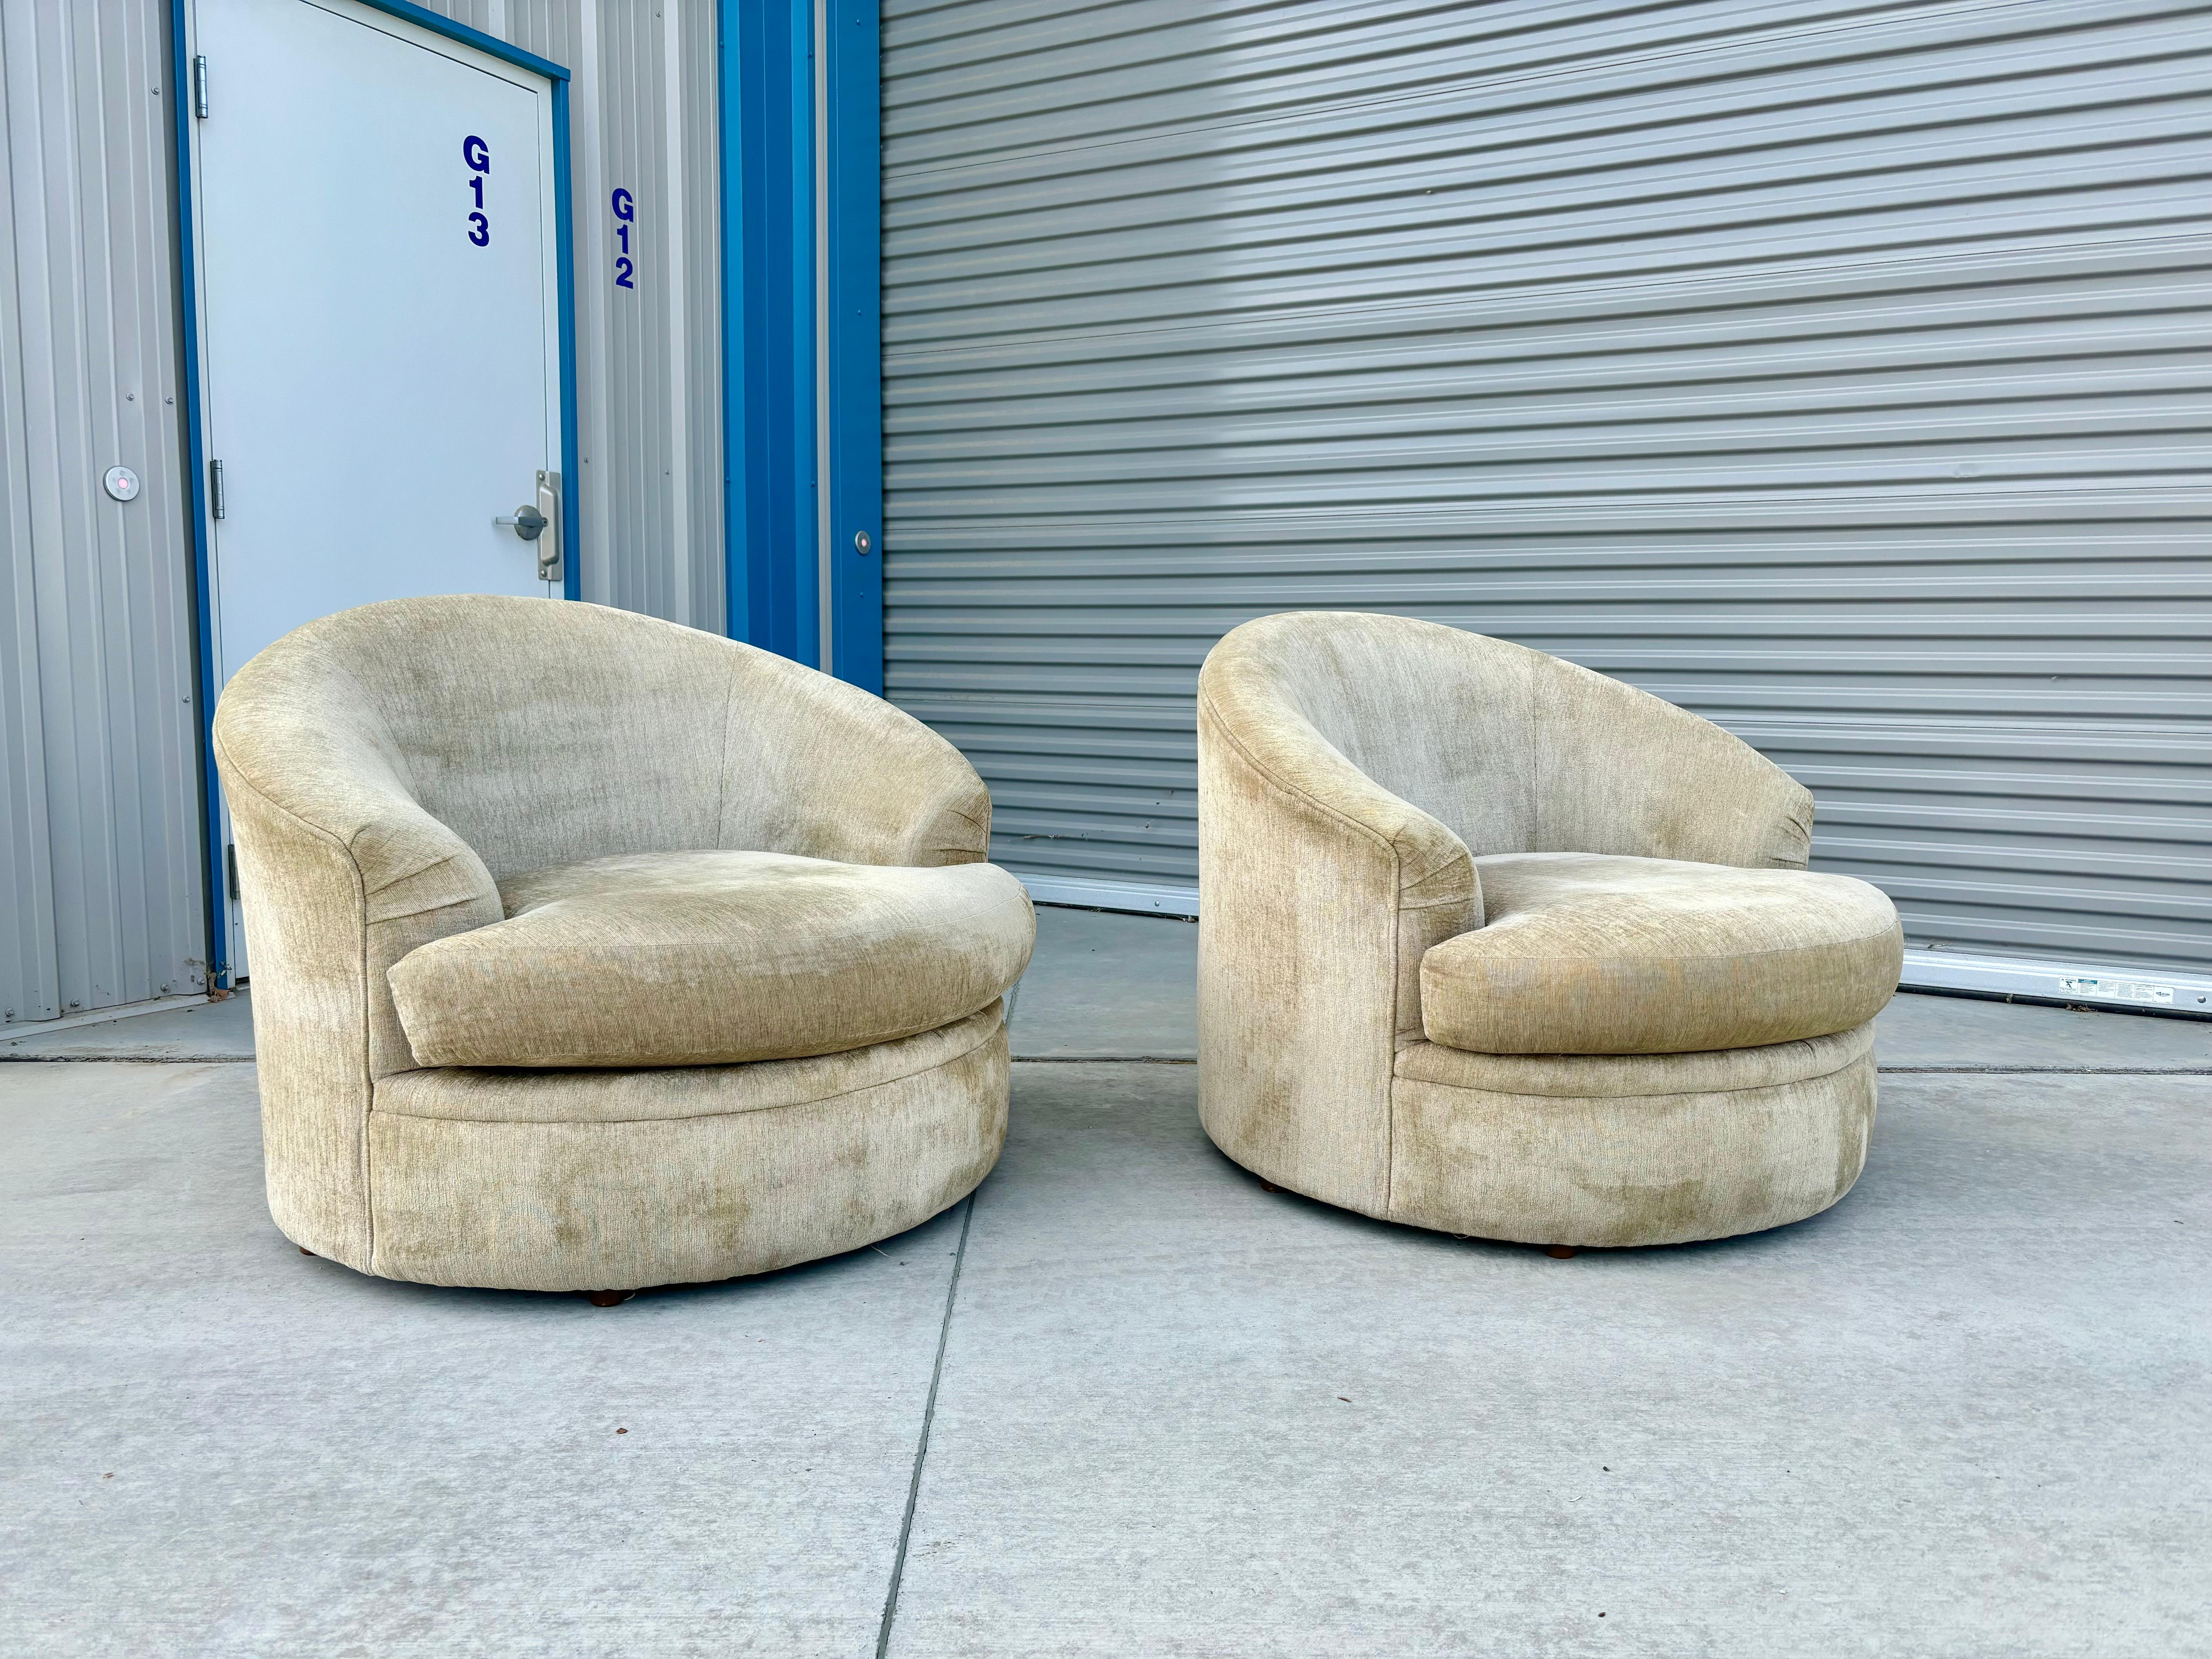 These beautiful mid-century modern lounge chairs was designed and manufactured in the United States circa 1970s. The unique barrel shape of these chairs is perfectly complemented by a curved backrest, providing both style and comfort. The chairs